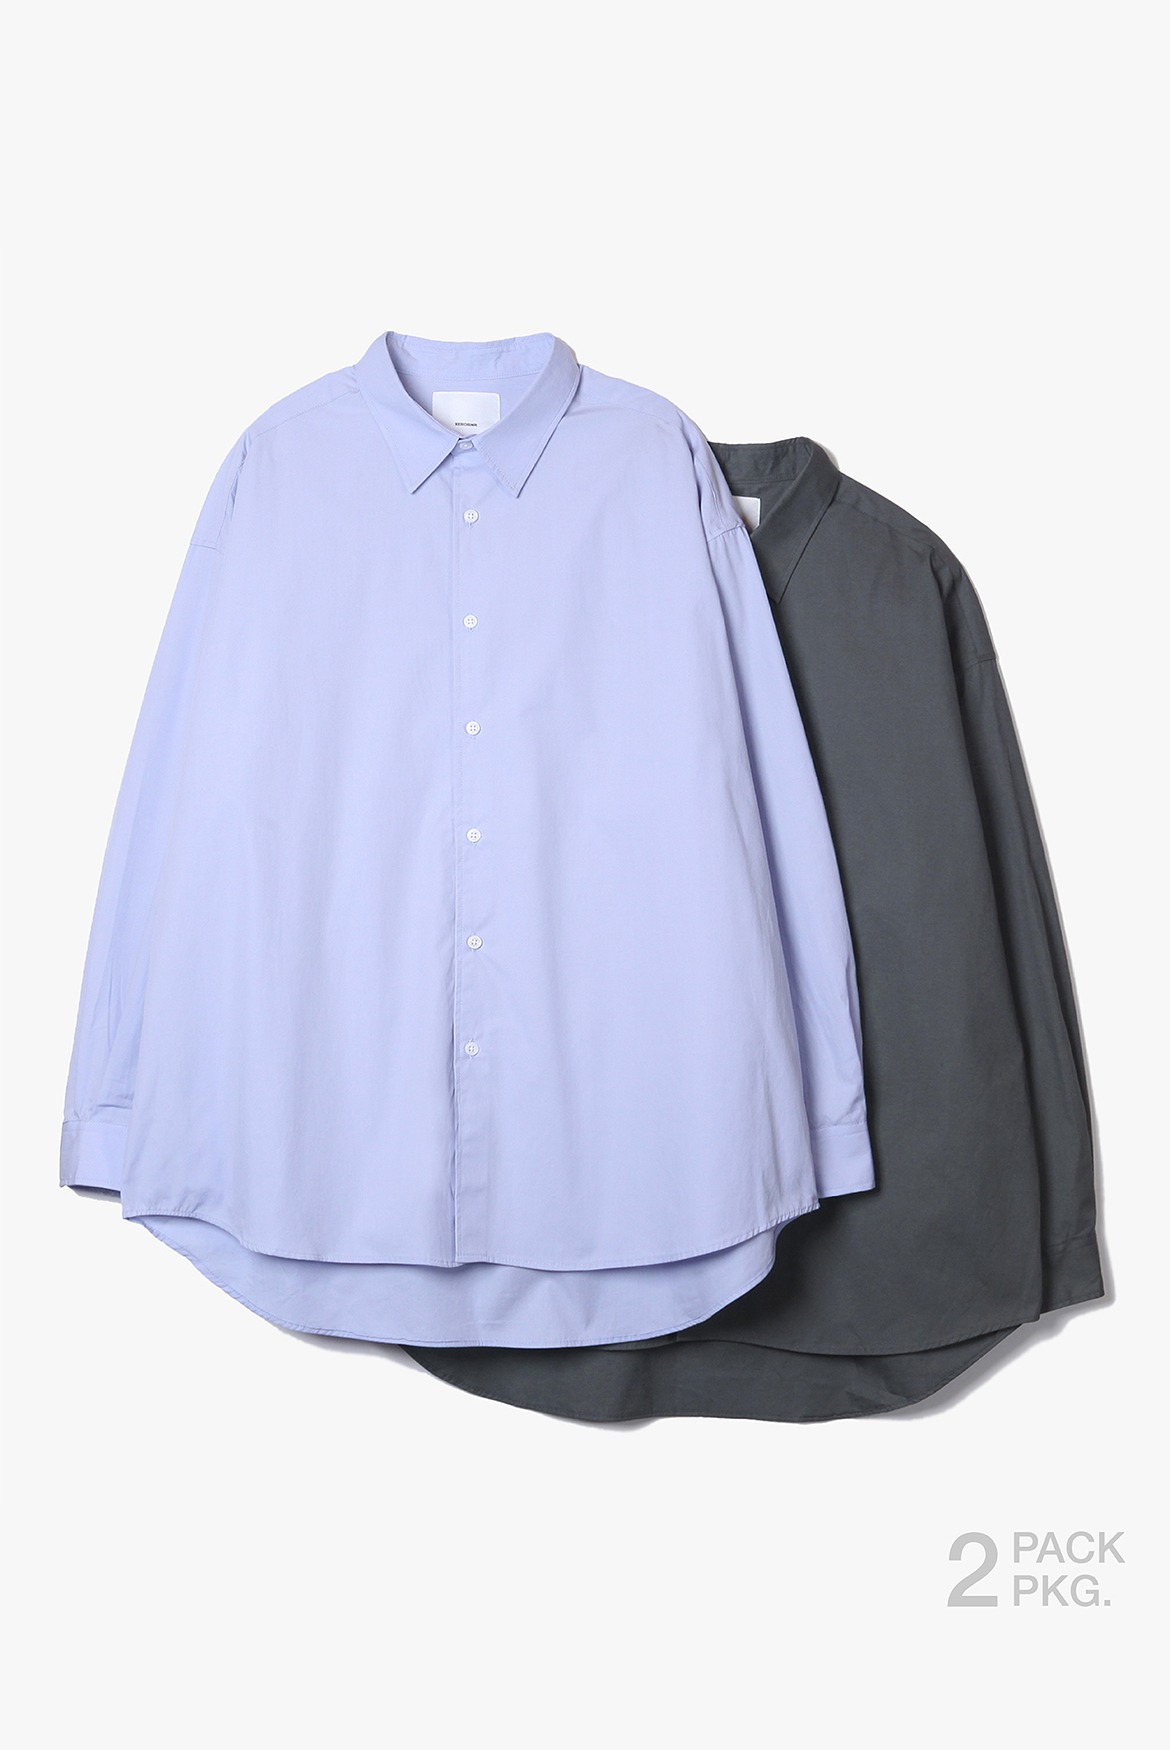 2Pack One Mile Shirts [Sky Blue/Charcoal]